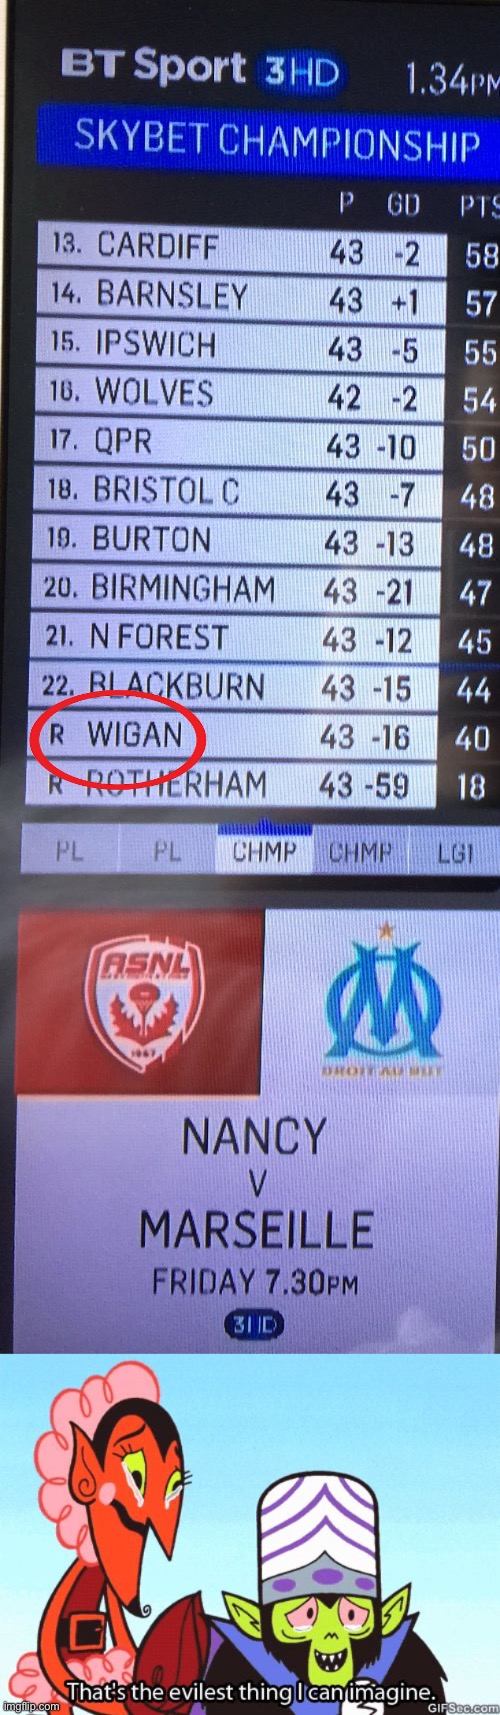 Did Wigan Get Relegated? | image tagged in wigan is relegated,that's the evilest thing i can imagine | made w/ Imgflip meme maker